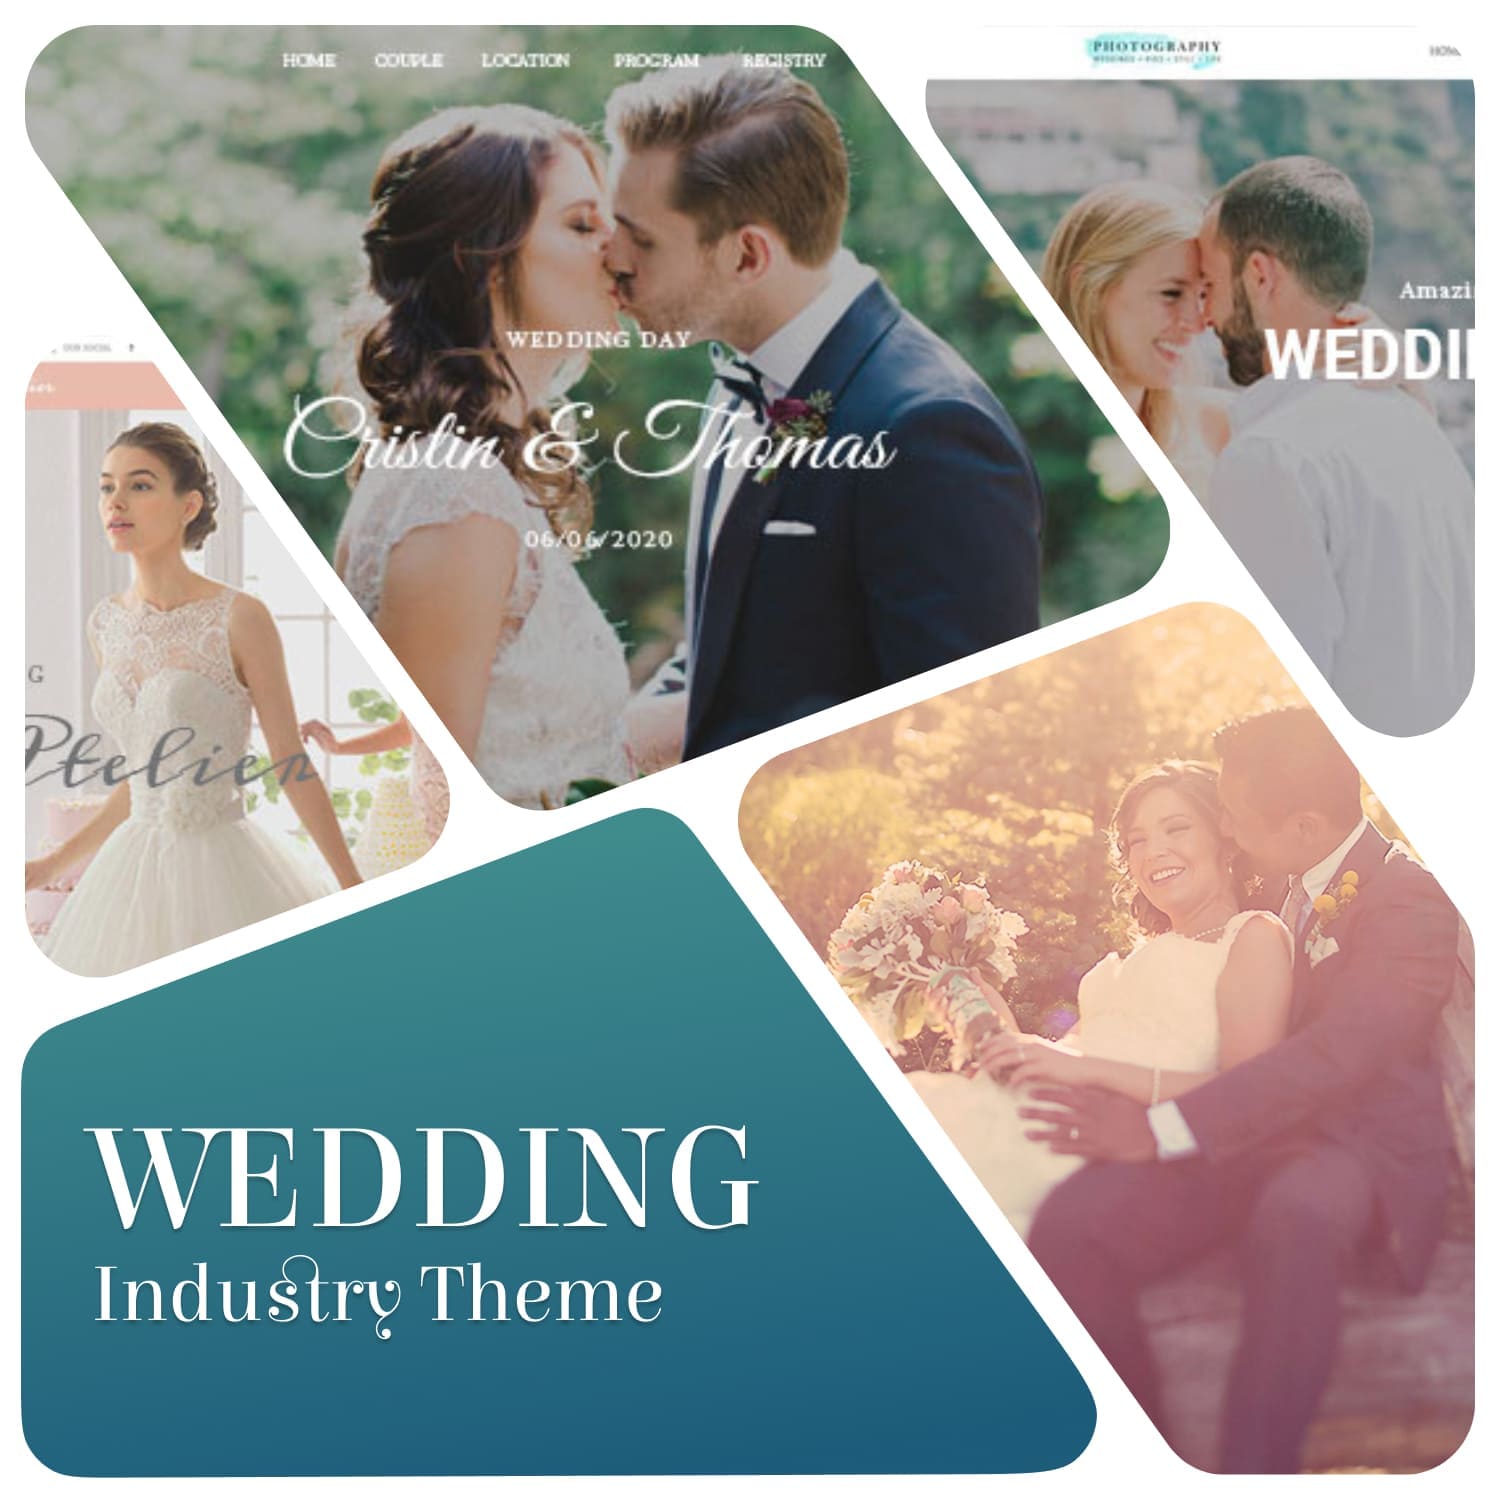 Wedding industry theme, main picture 1500x1500.